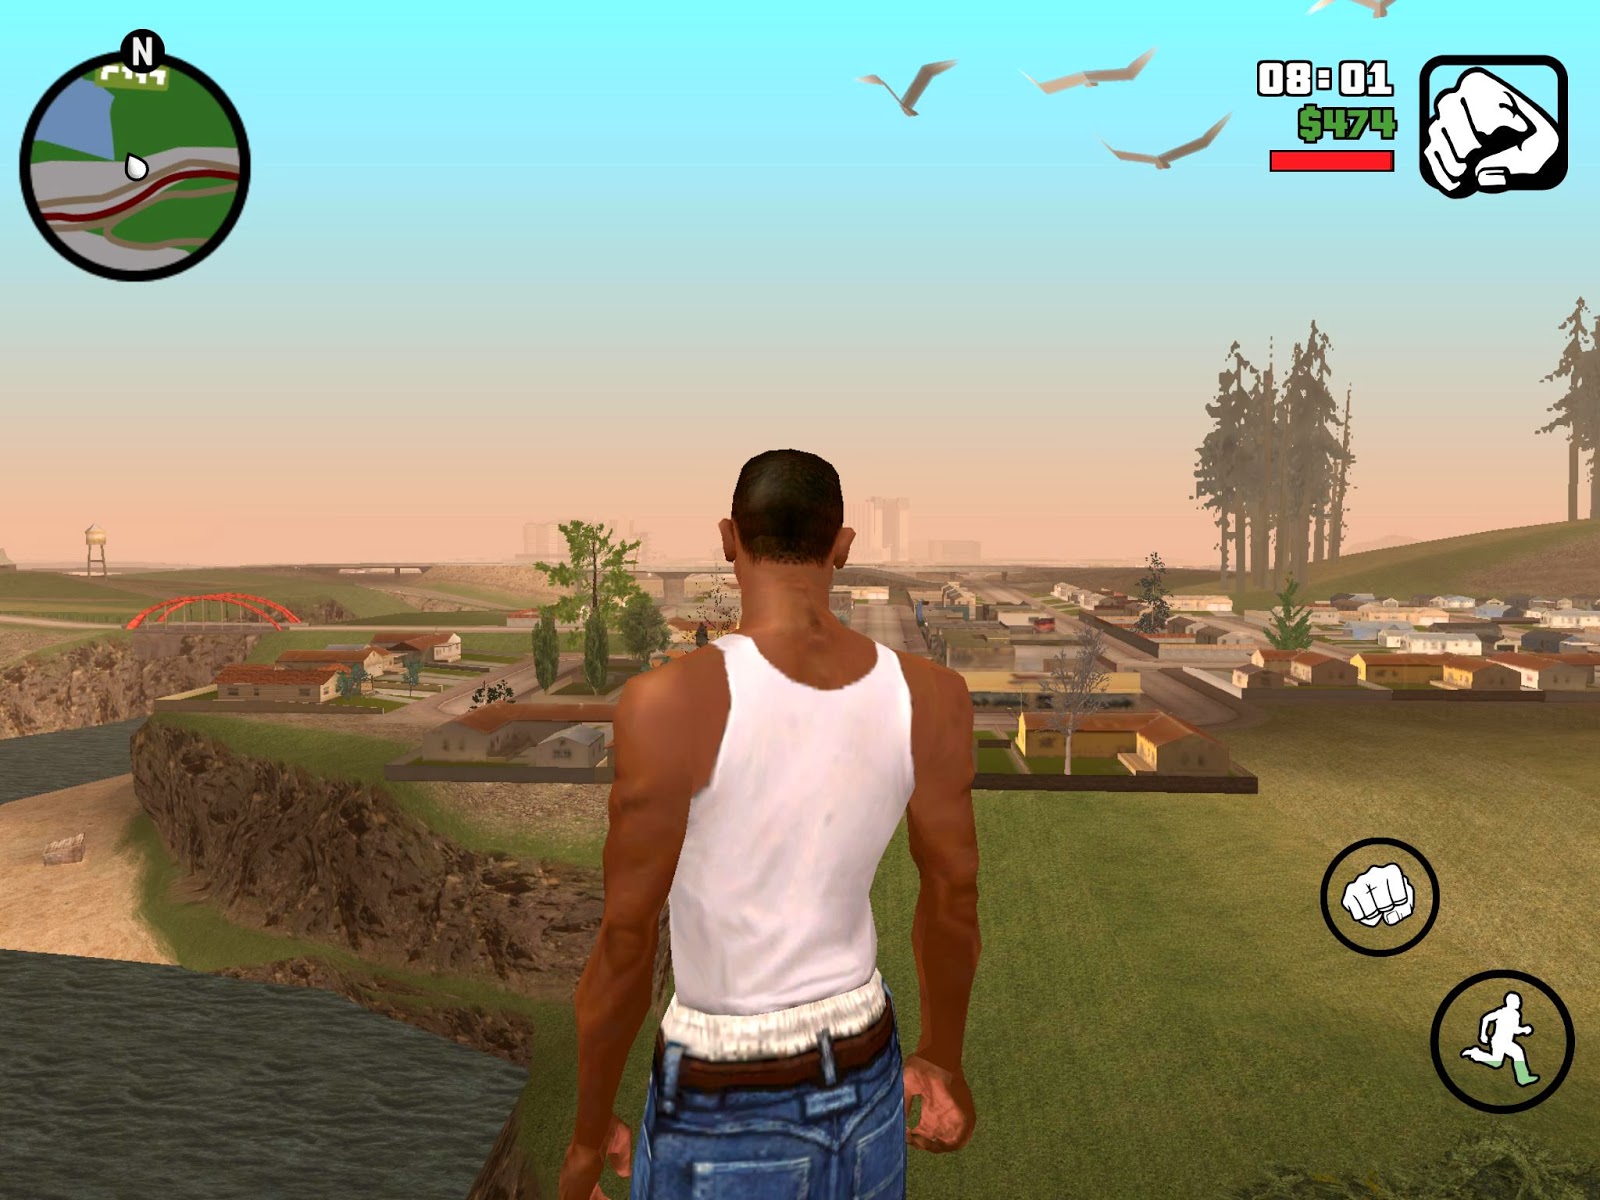 Download Grand Theft Auto San Andreas For Android APK ...